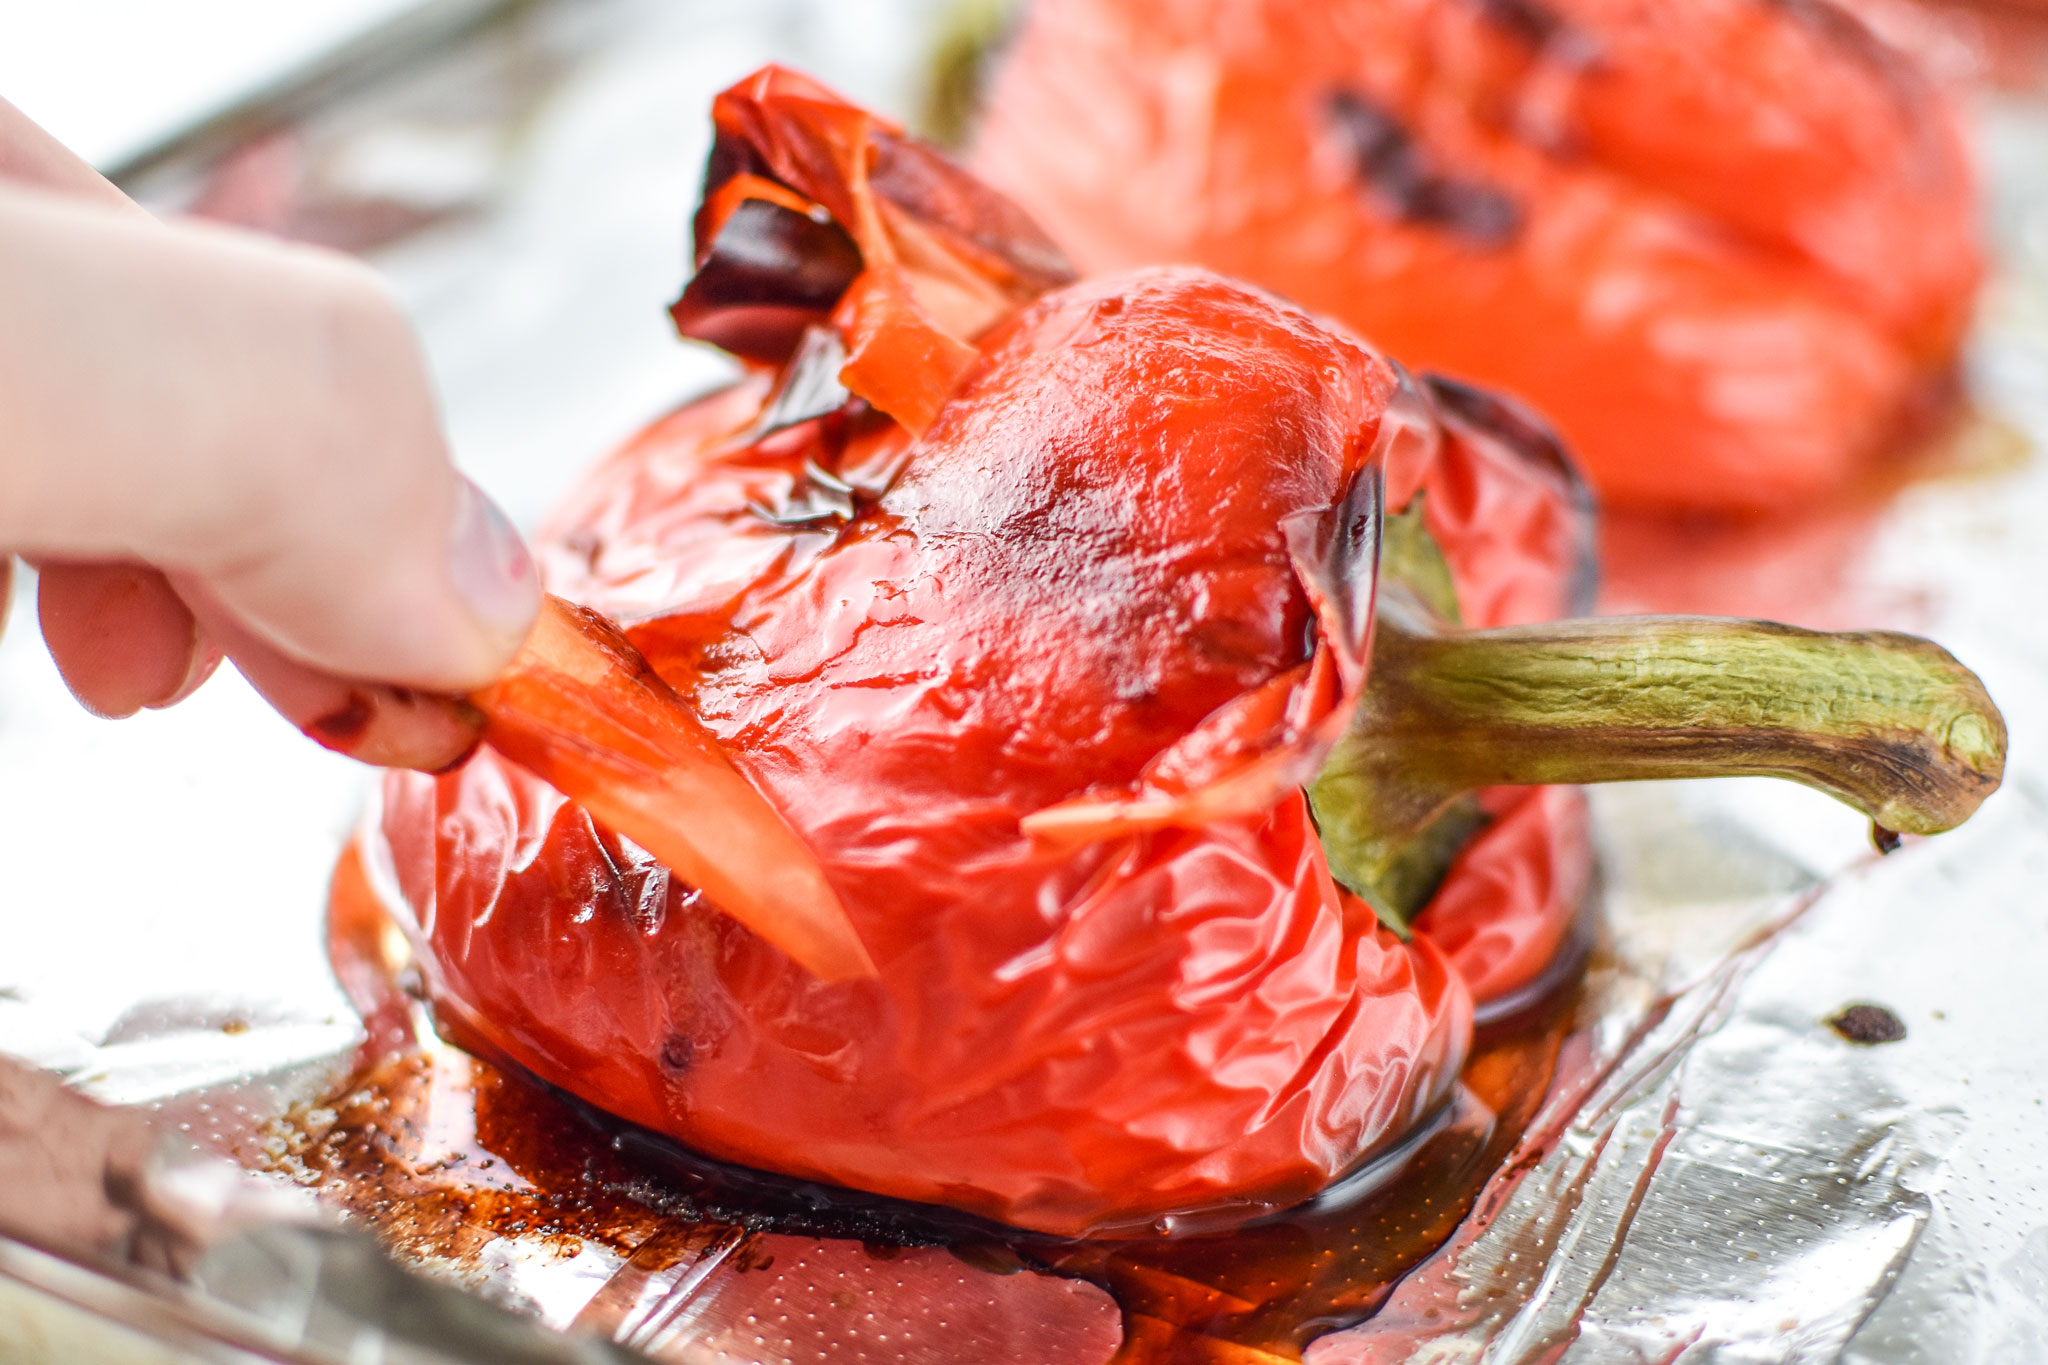 what is looks like under the peel of the roasted red bell peppers